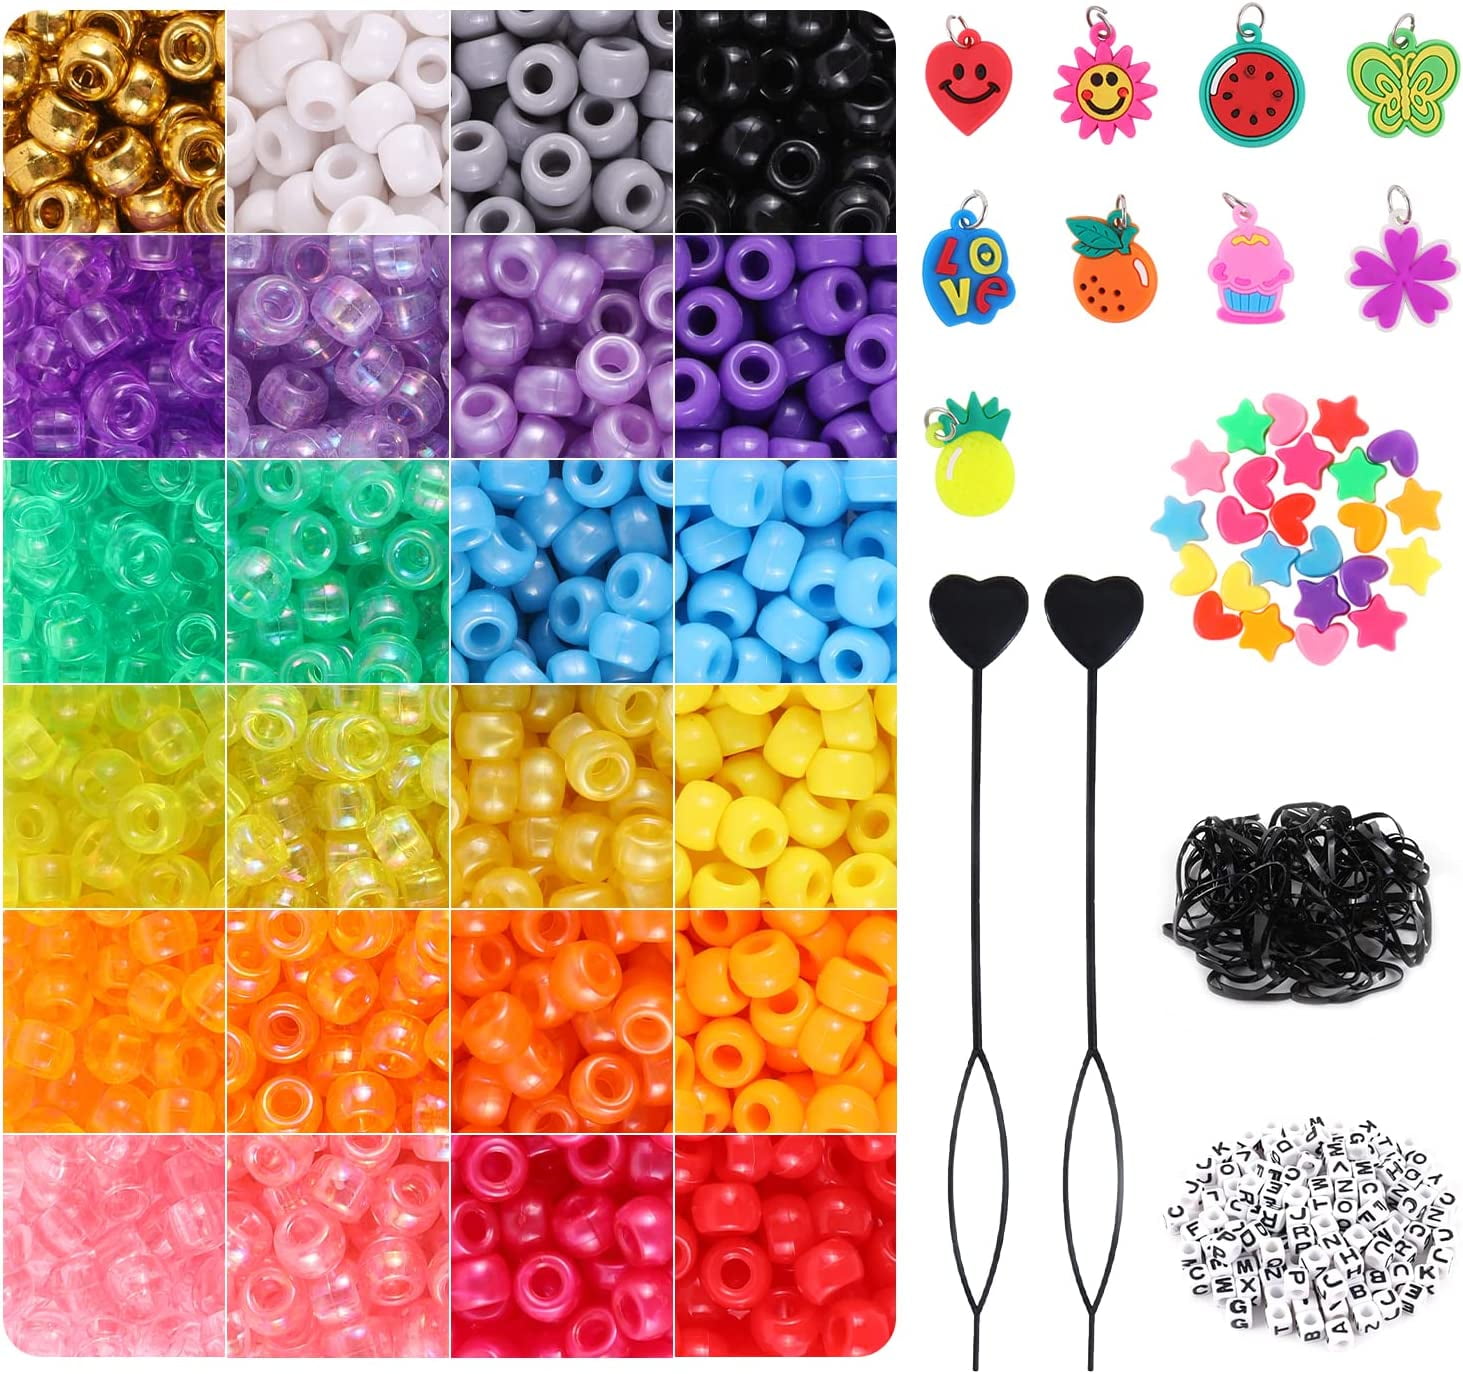 Miss Rabbit 3160+ Pcs Kandi Beads Kit for Bracelet Making, Rainbow Pony  Beads for Jewelry Making with Letter Beads Cute Charms String, Hair Beads  for